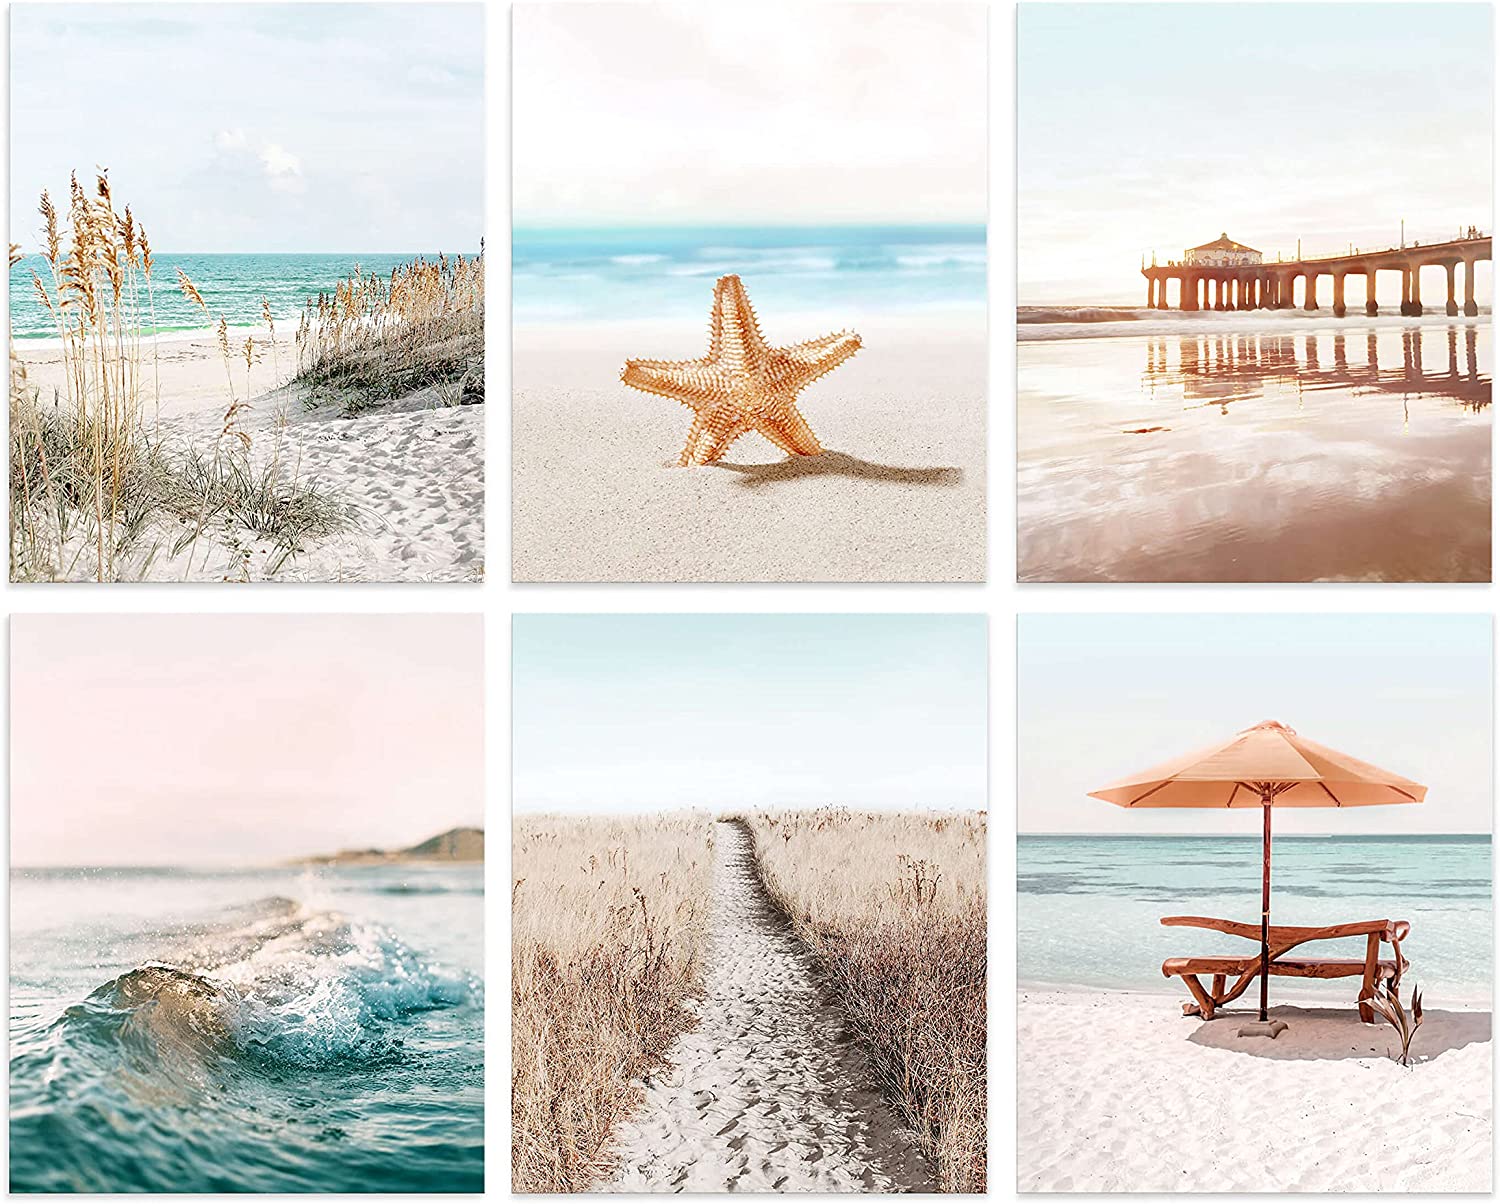 Buy Coastal Prints Wall Art Beach Picture Set of 6 Aesthetic Seaside Artwork Starfish Sand Boardwalk Ocean Wave Posters for Home Decor Unframed 8x10 Inch Online at Lowest Price in Ubuy Saint